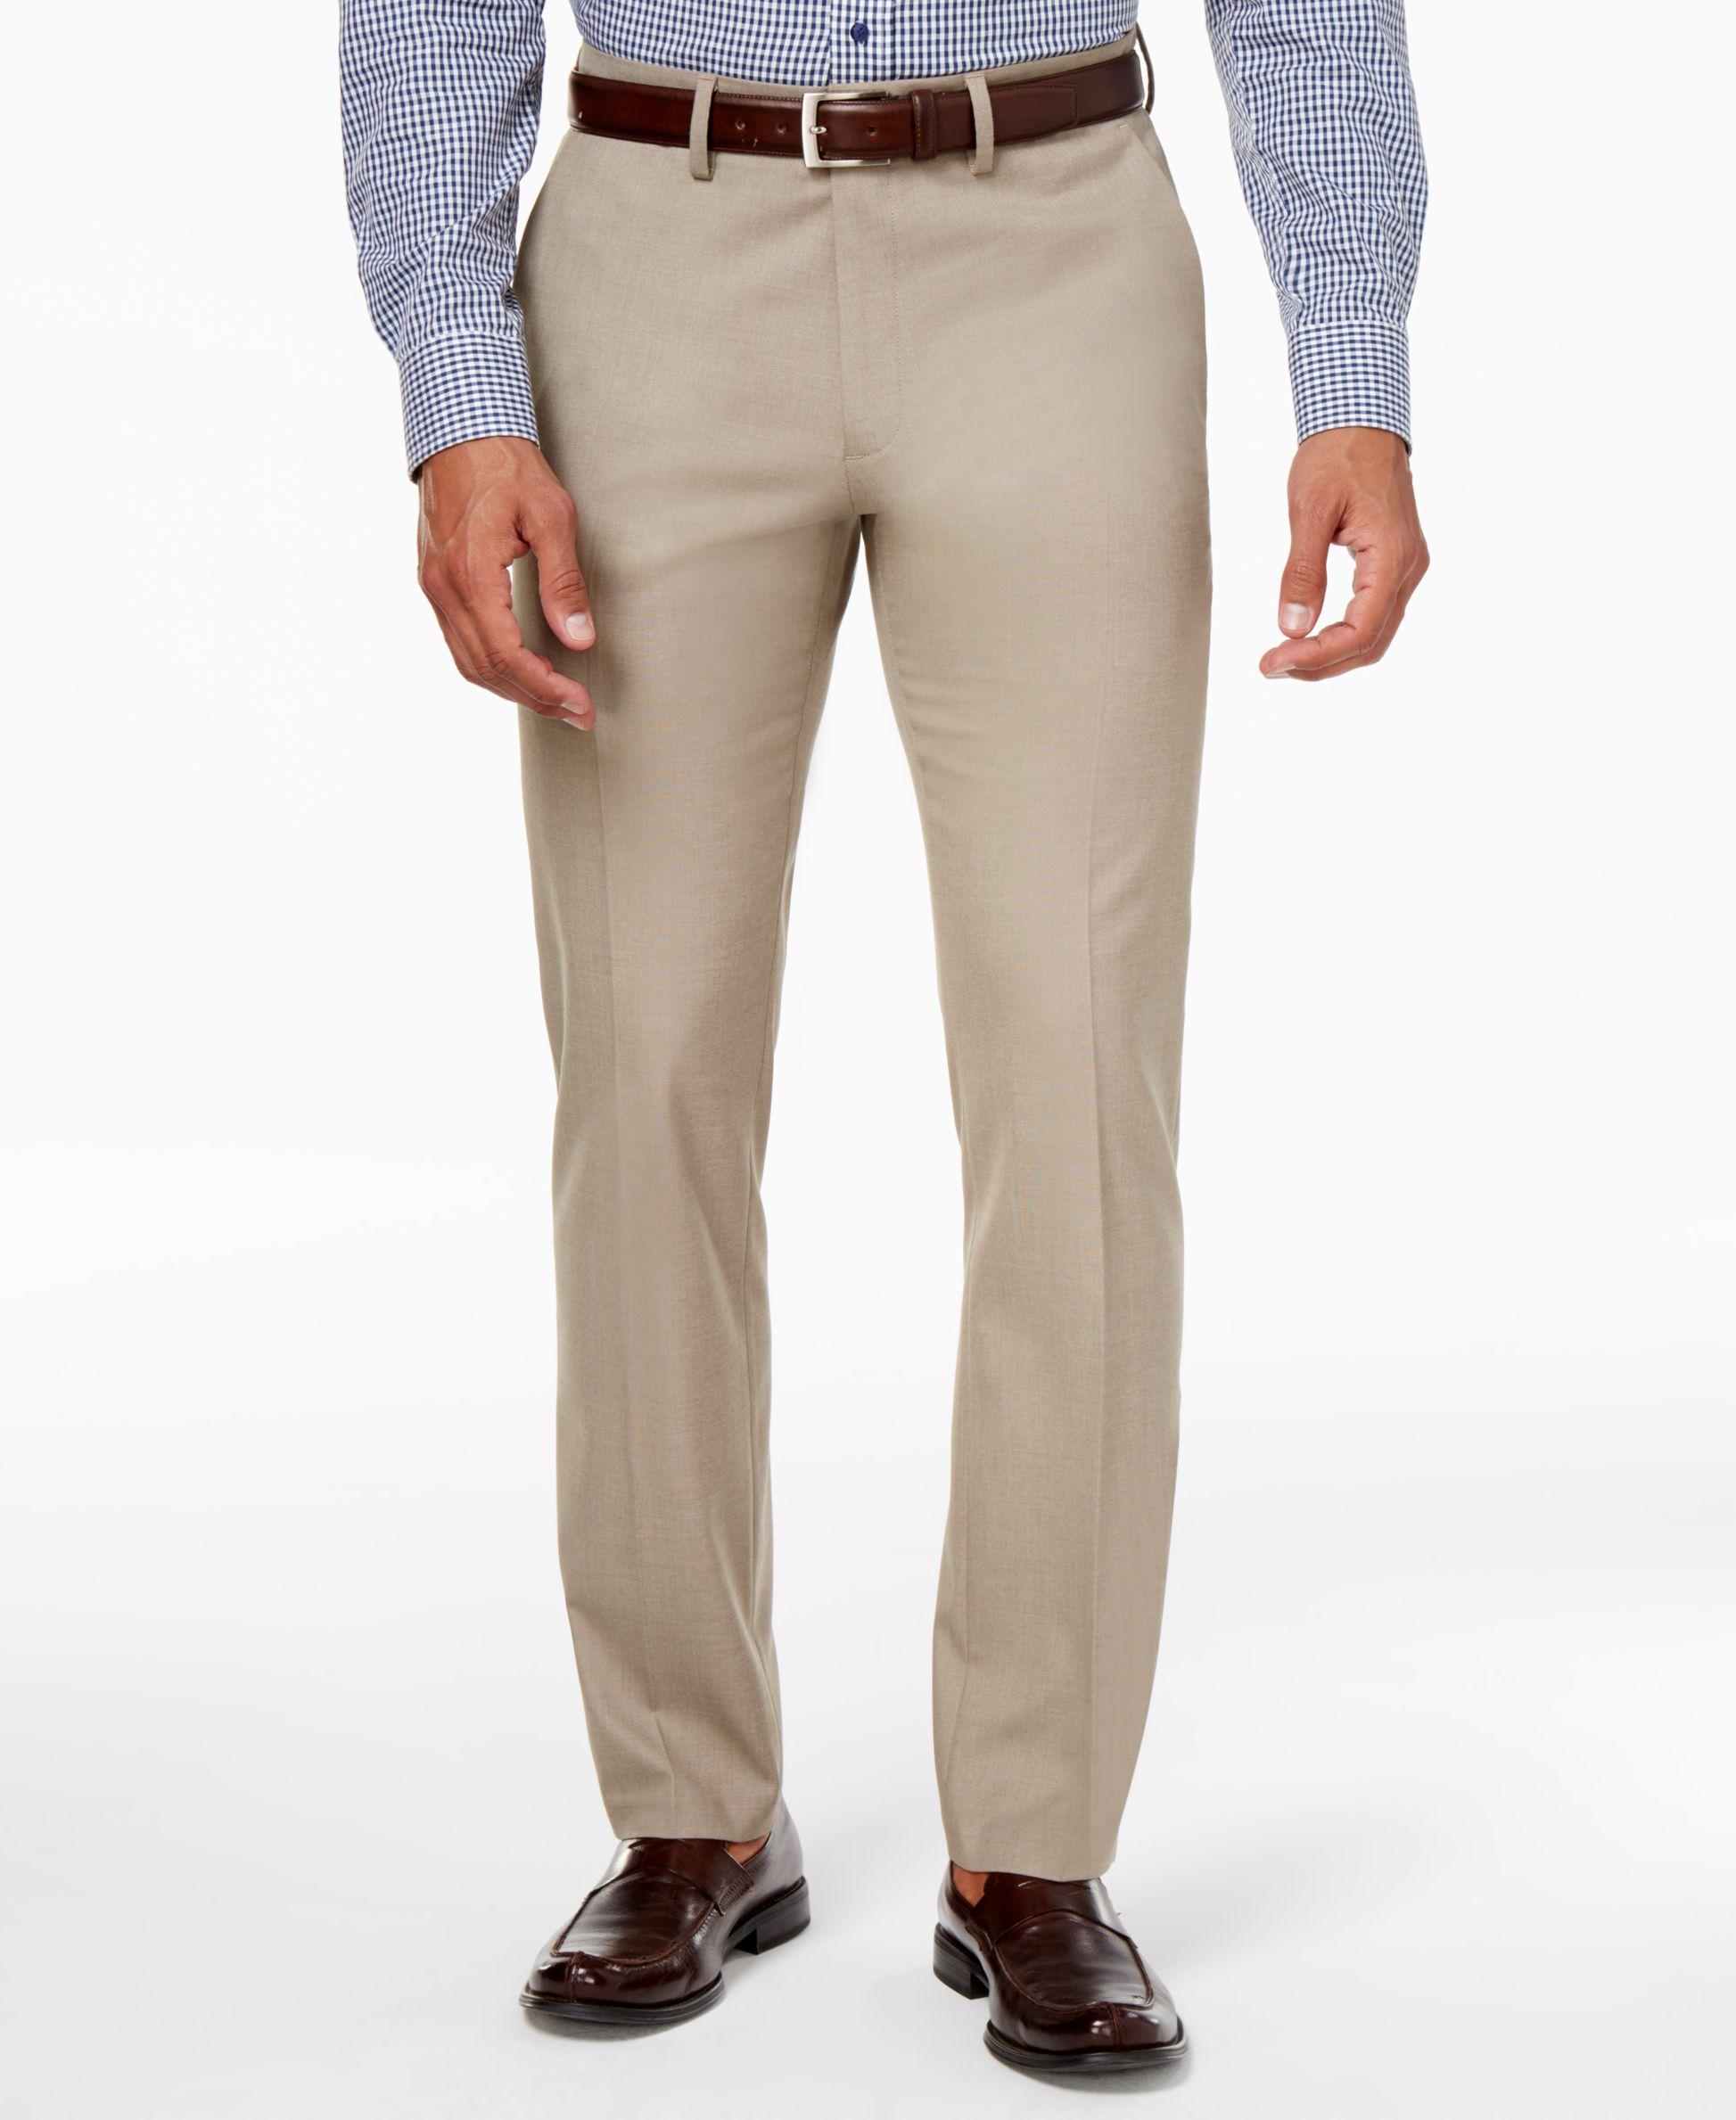 Kenneth cole reaction Men's Slim-fit Stretch Dress Pants, Only At Macy